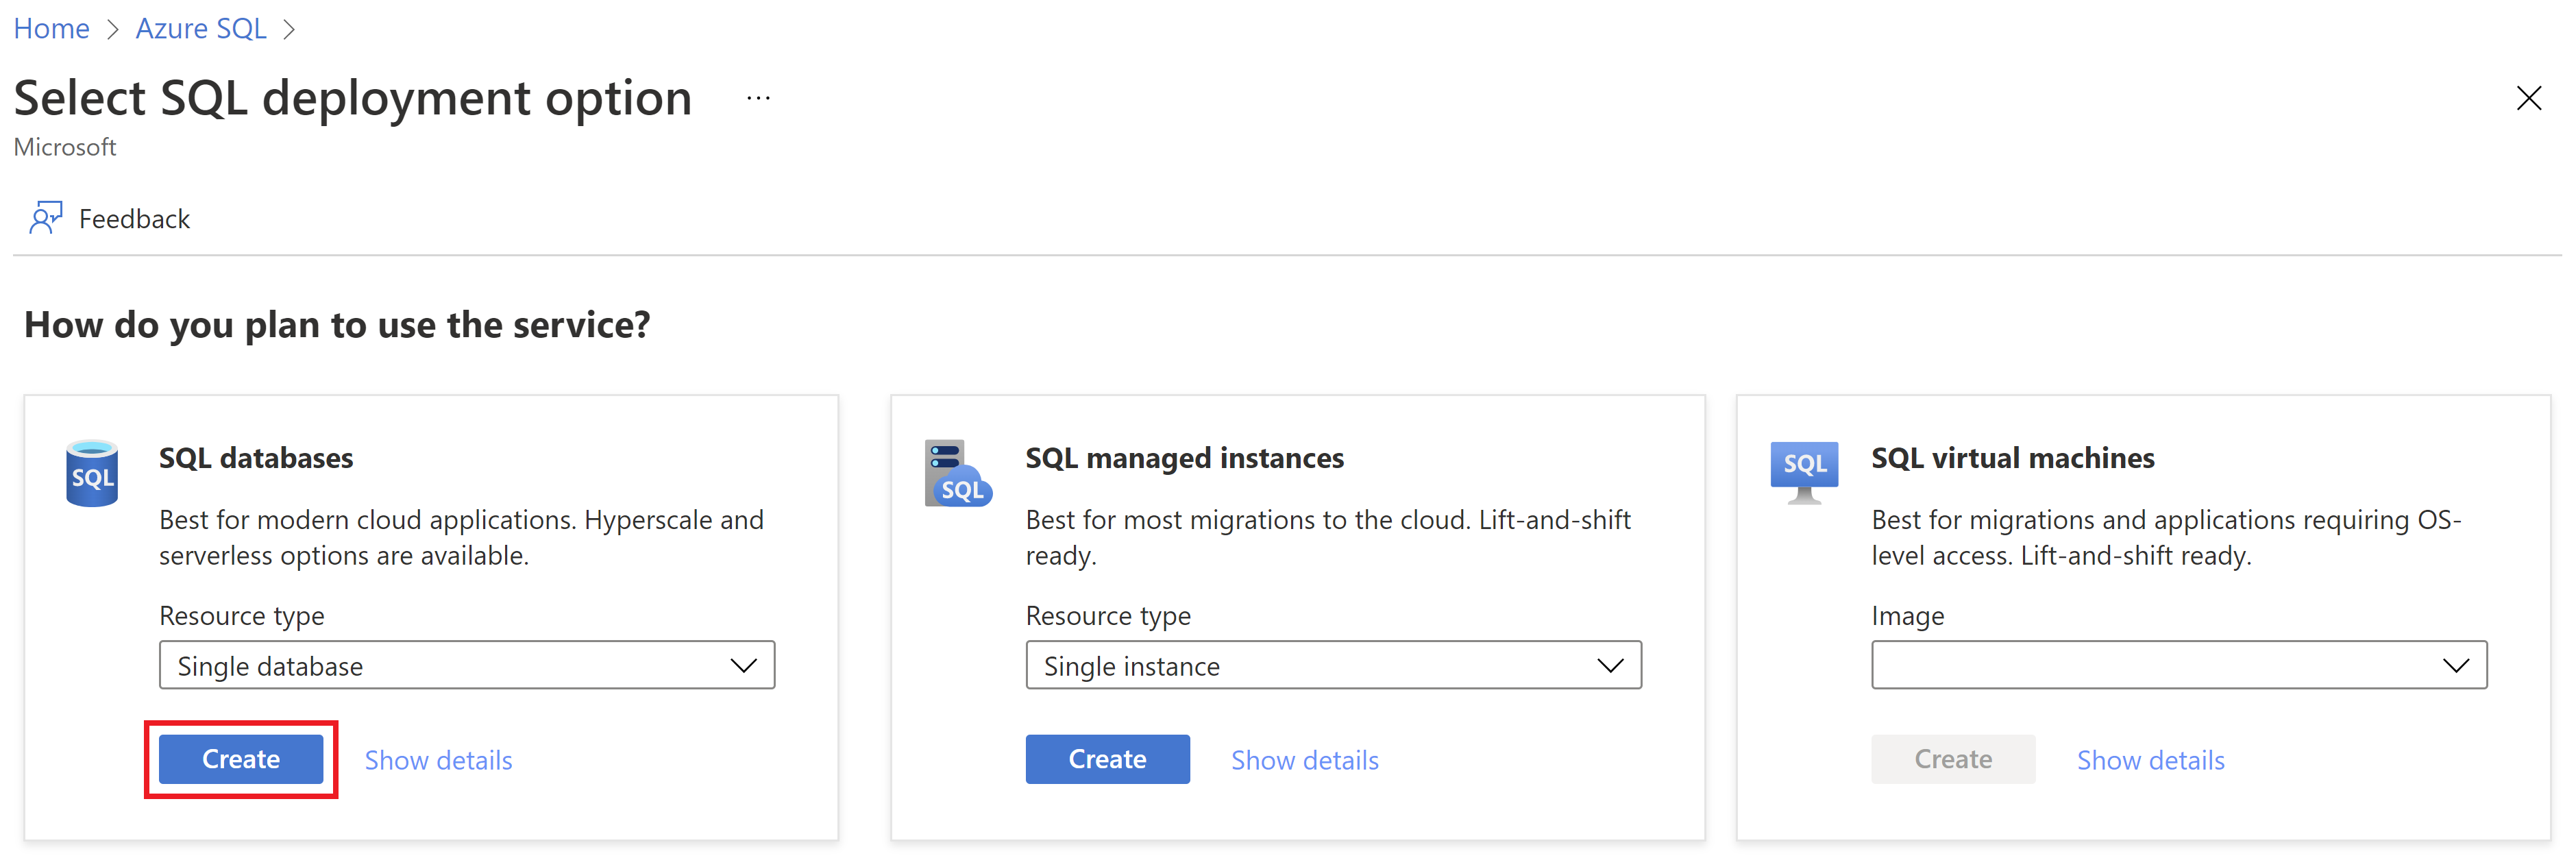 Screenshot of the Azure portal, select Azure SQL deployment page, creating a new single database.